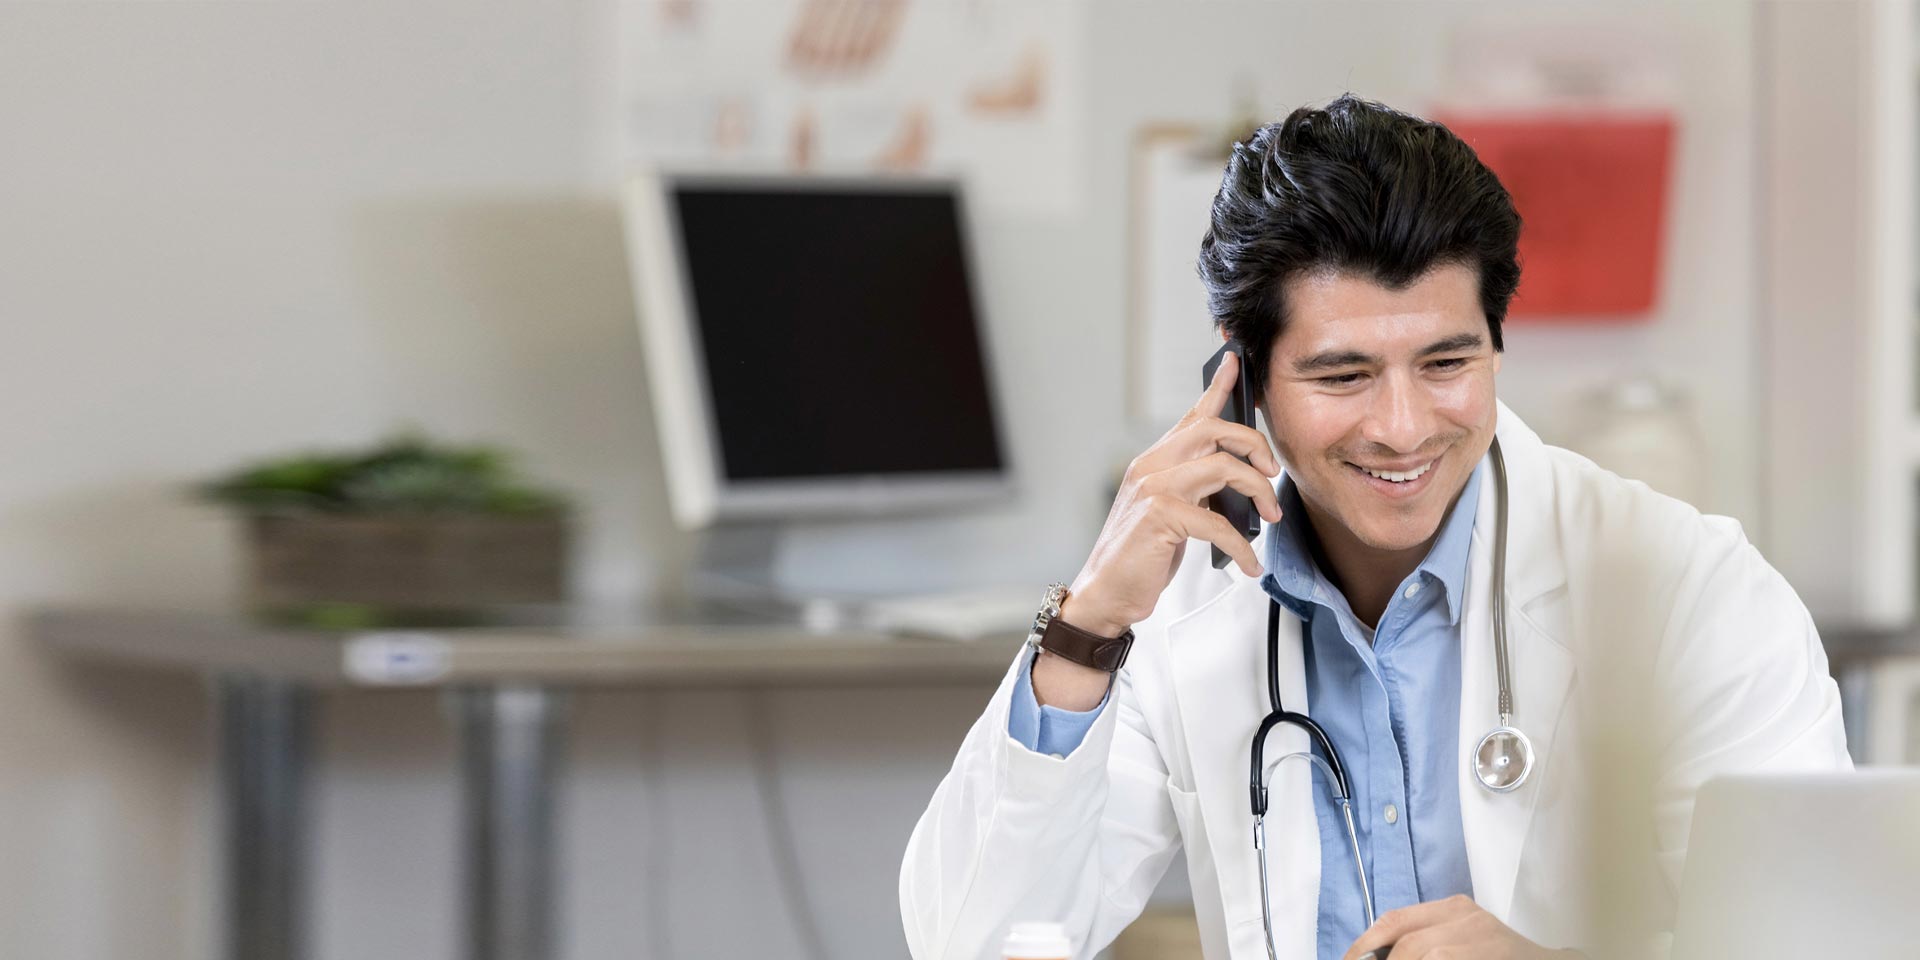 A medical professional uses his cell phone to discuss healthcare financing options